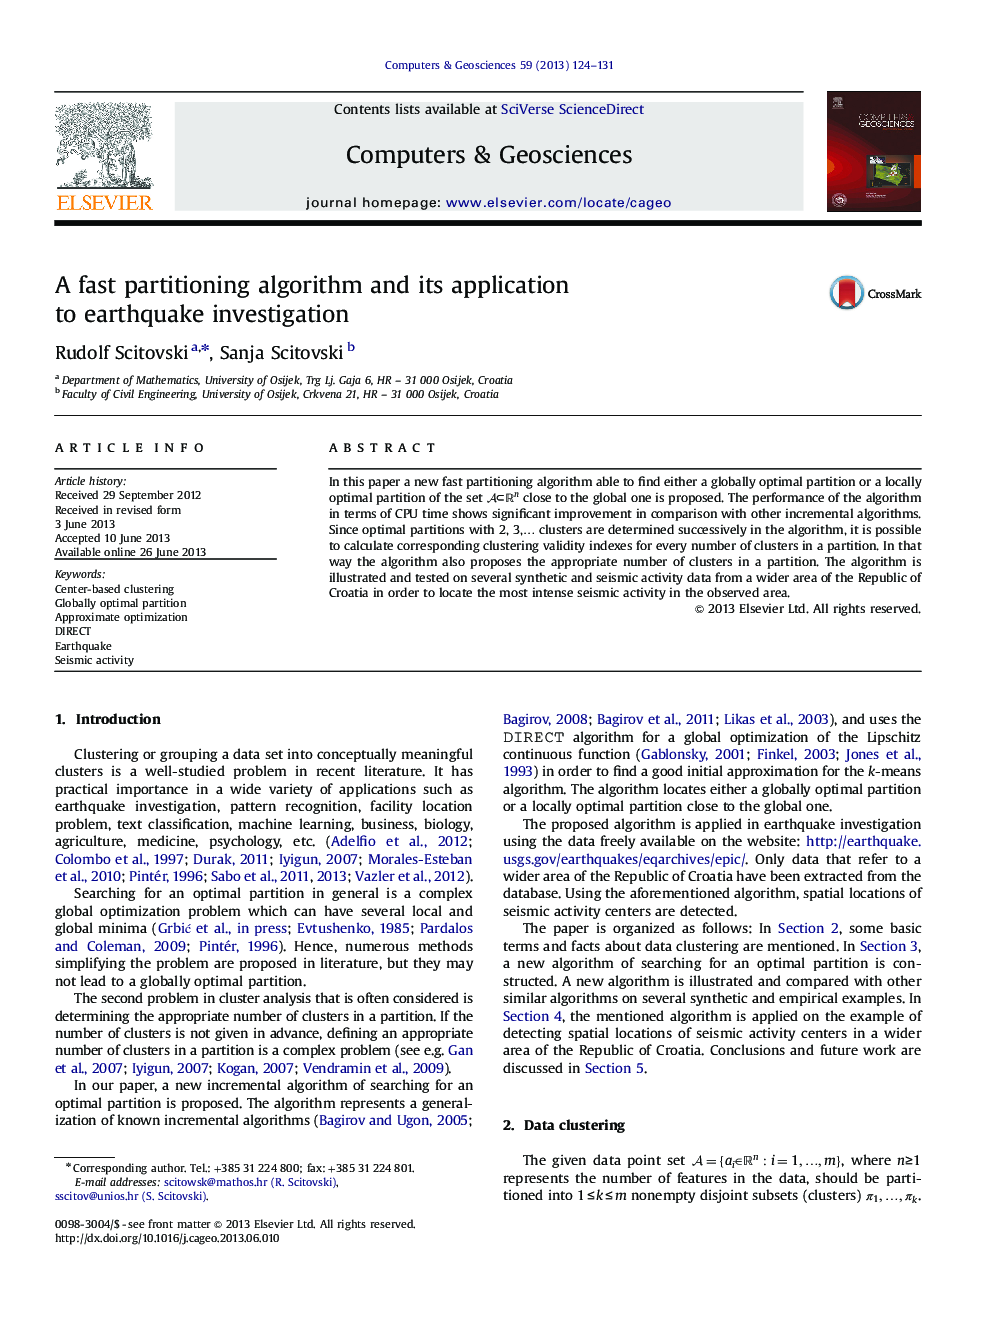 A fast partitioning algorithm and its application to earthquake investigation